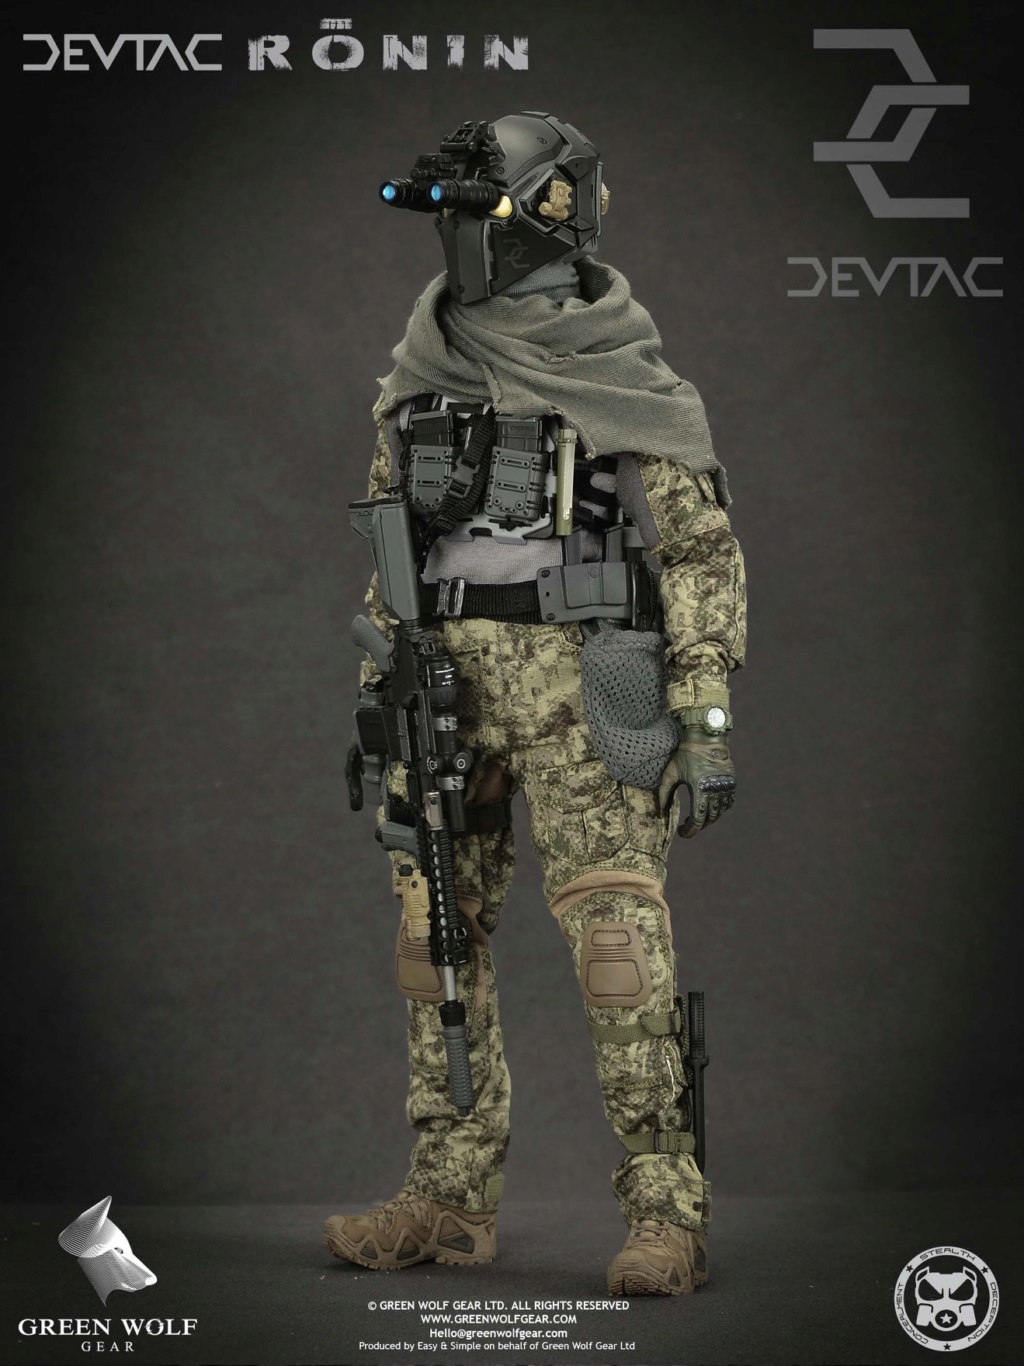 ModernMilitary - NEW PRODUCT: Green Wolf Gear DEVTAC Ronin 1/6 Action Figure (VS2434P) 262